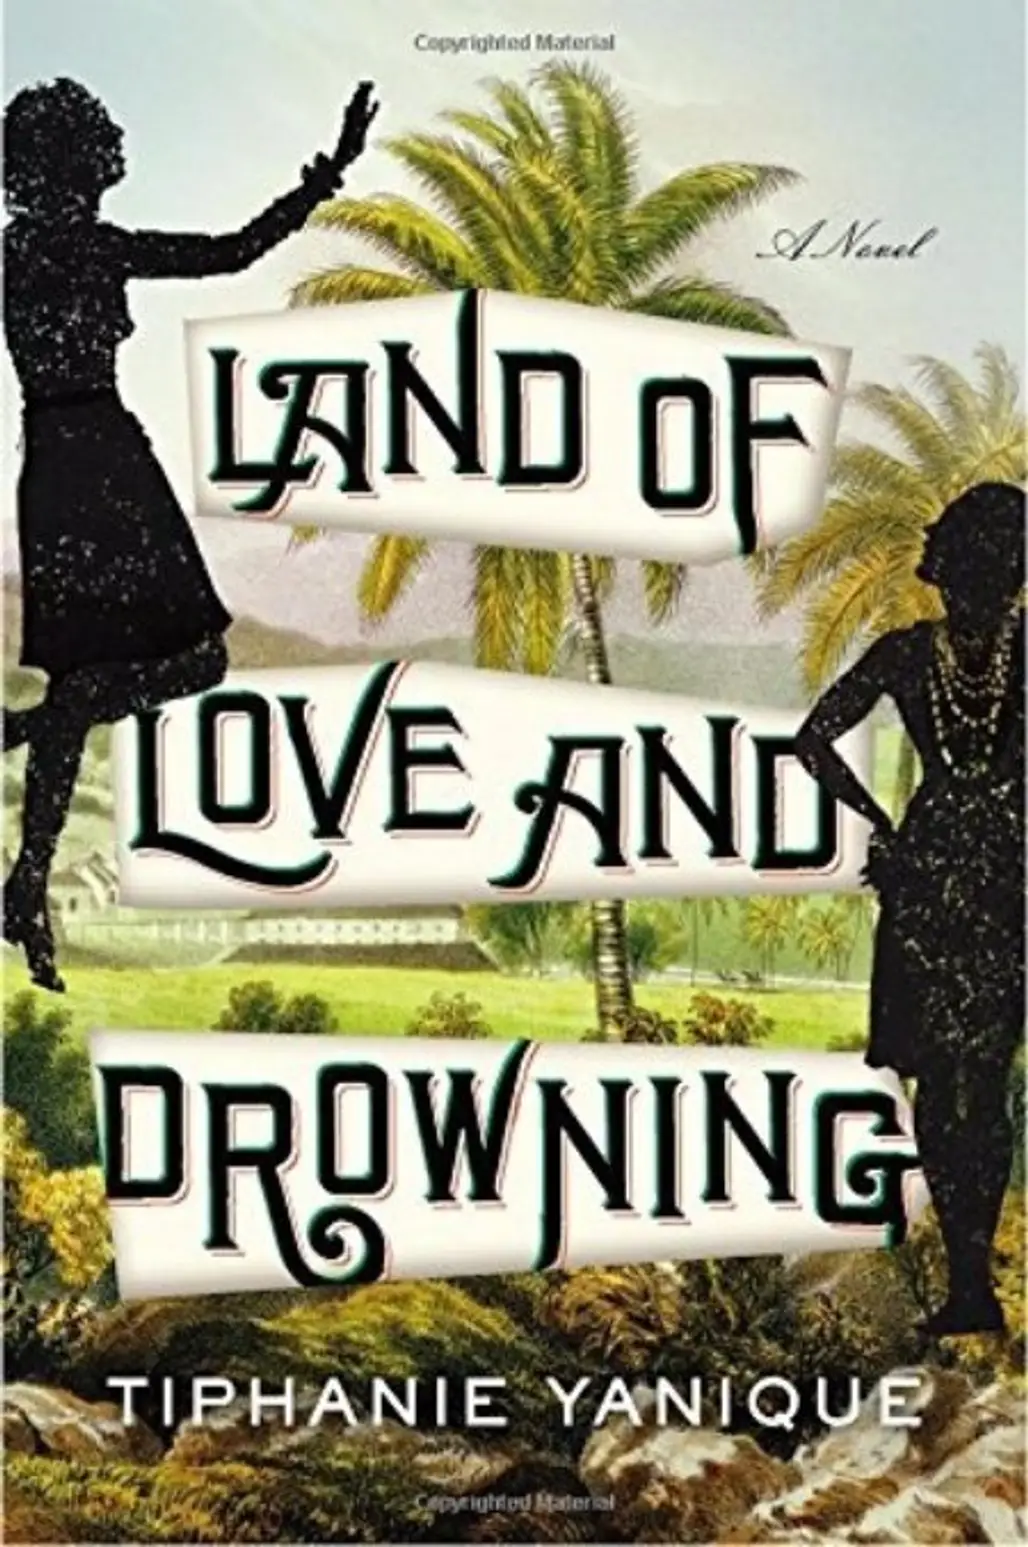 Land of Love and Drowning by Tiphanie Yanique